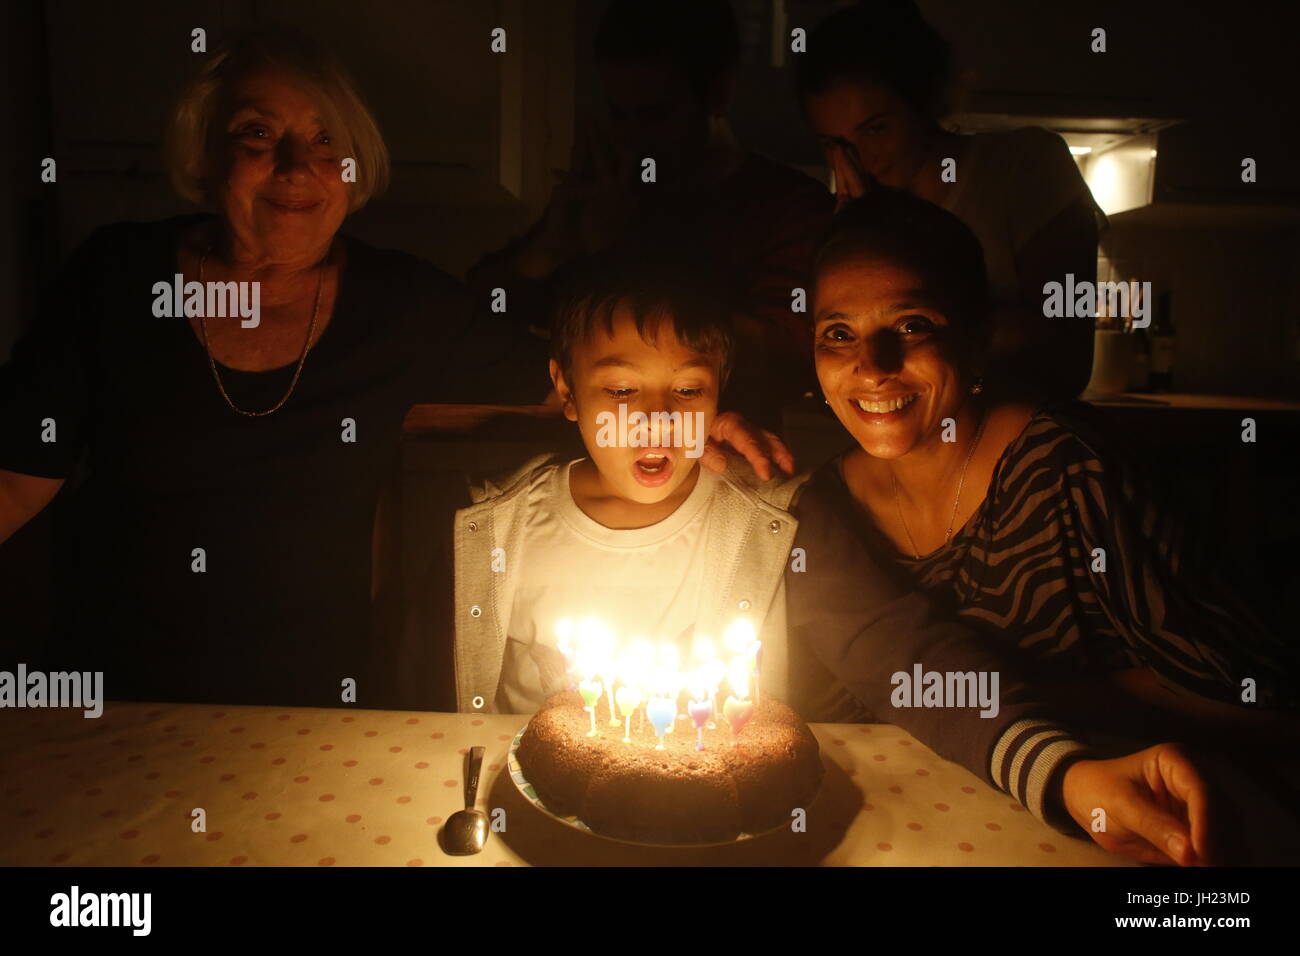 11-year-old boy's birthday. La France. Banque D'Images